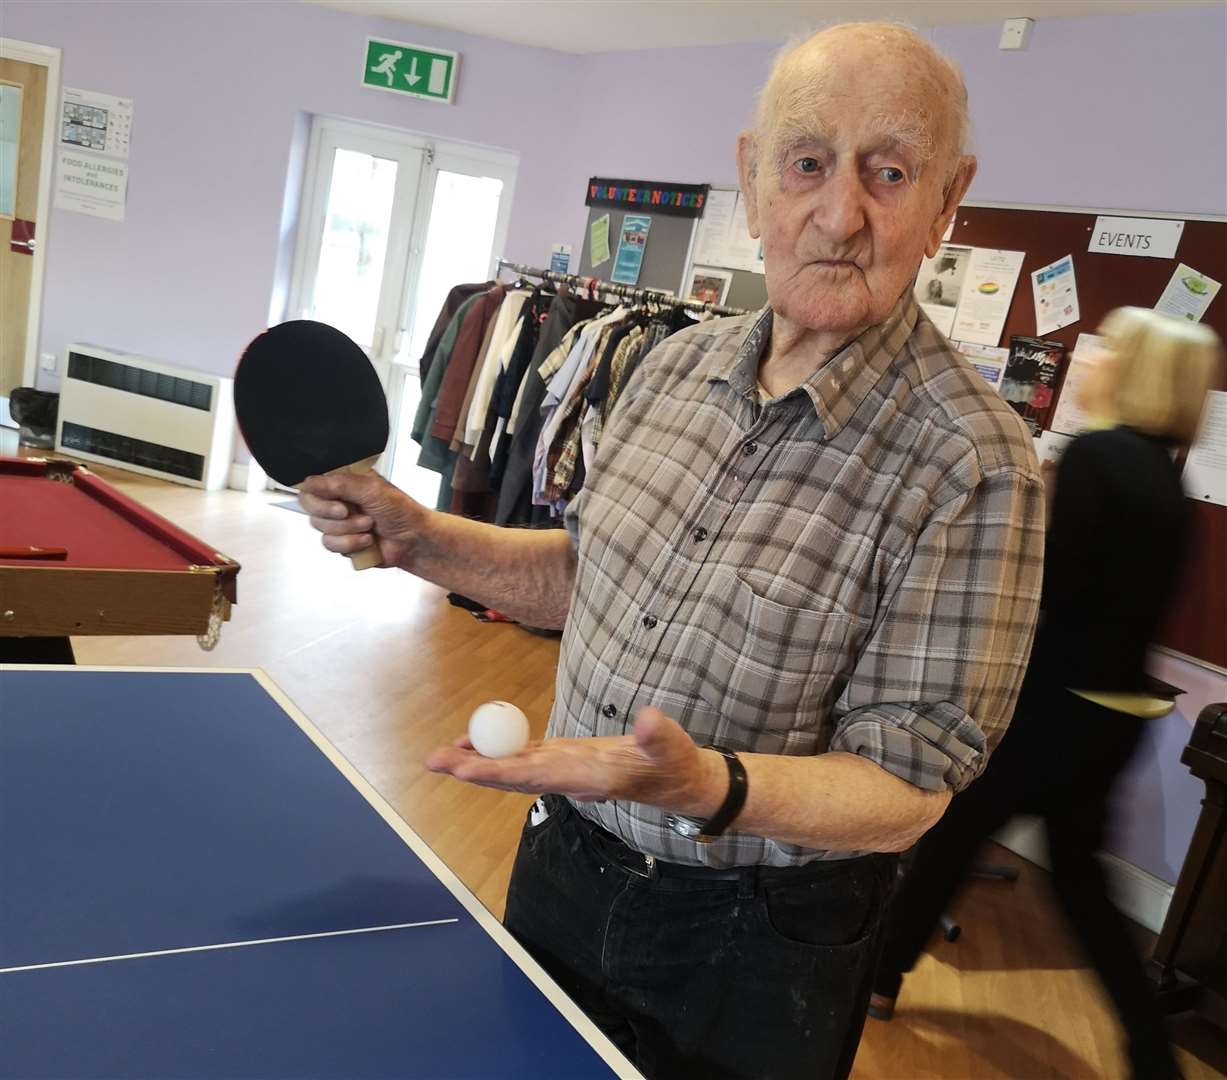 Arthur says playing table tennis is good exercise for his brain